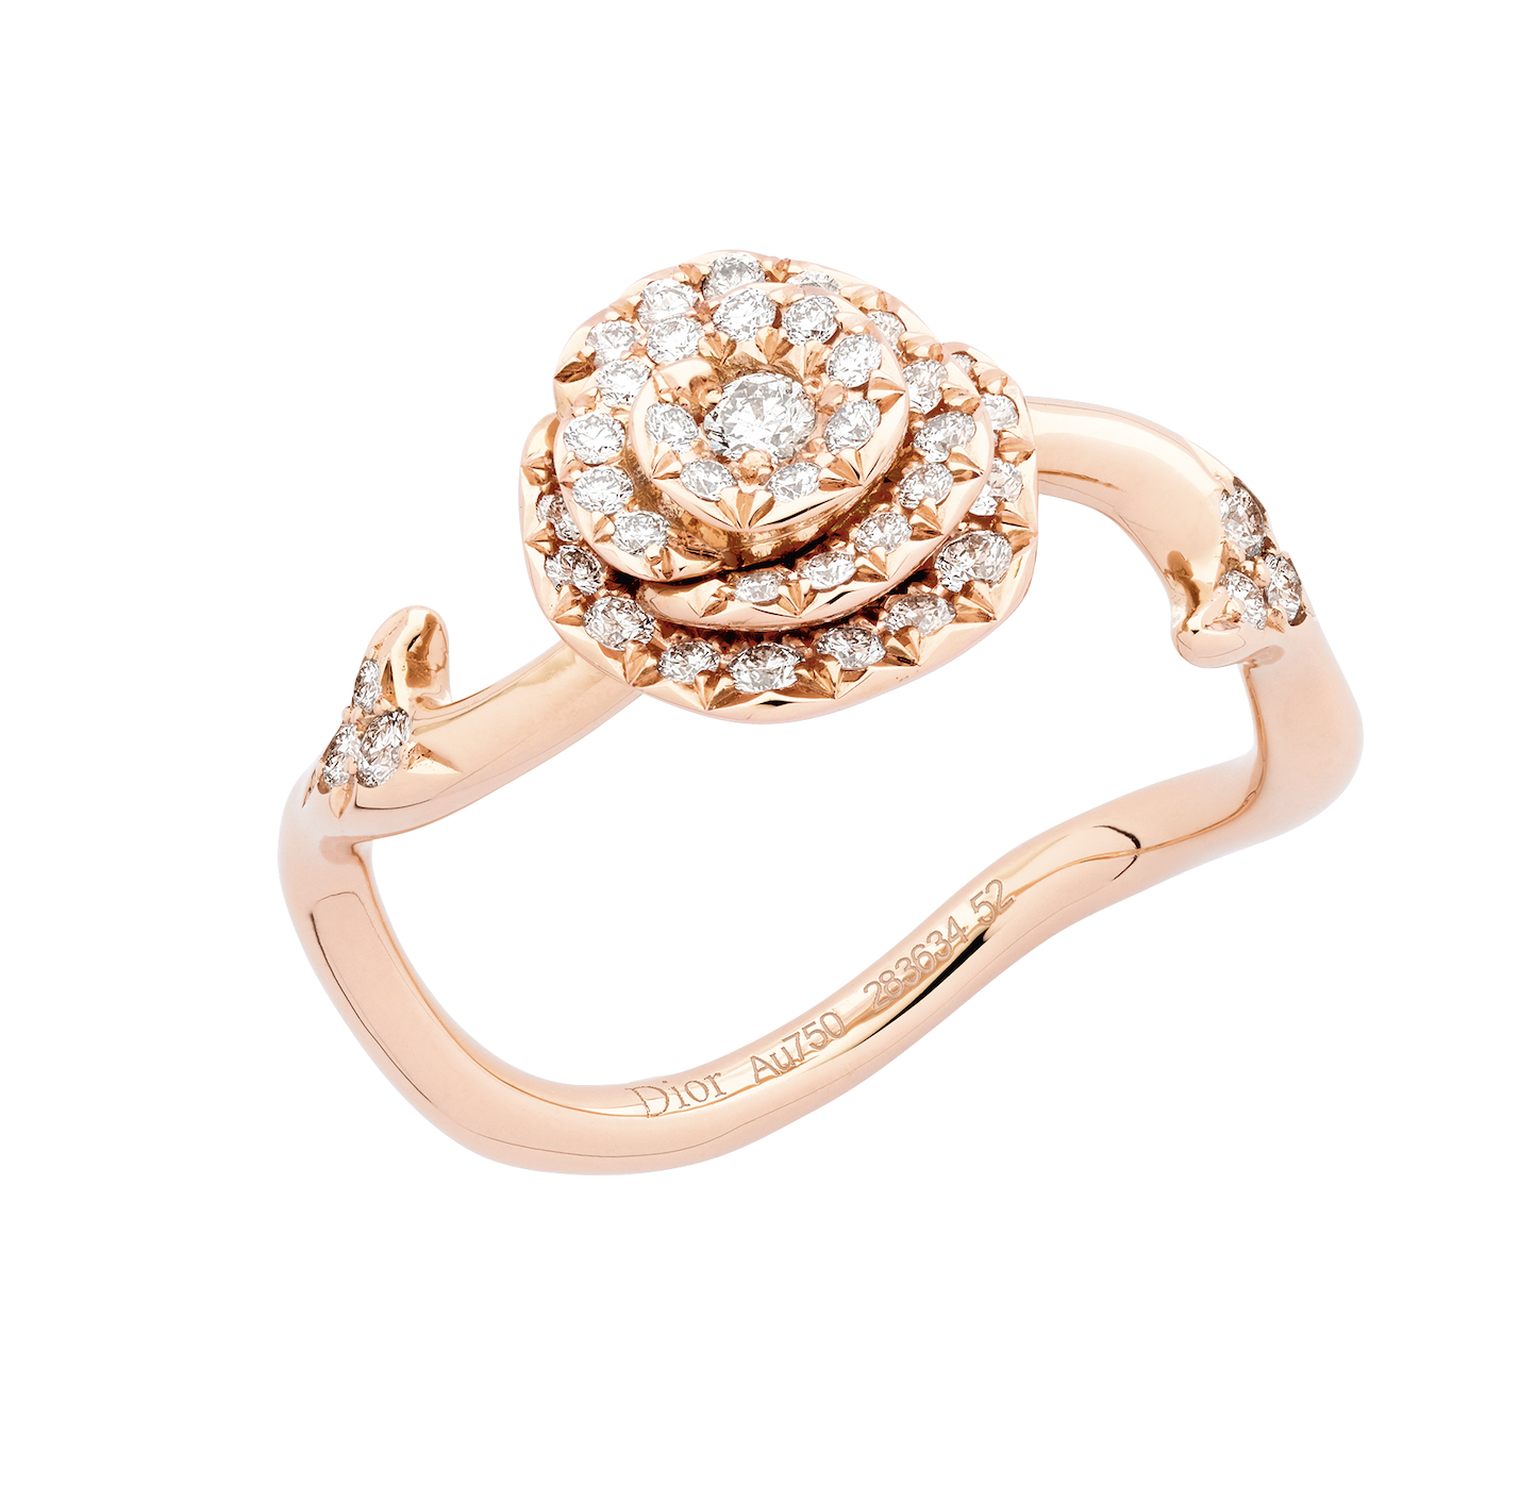 Rose Dior Couture ring with diamonds